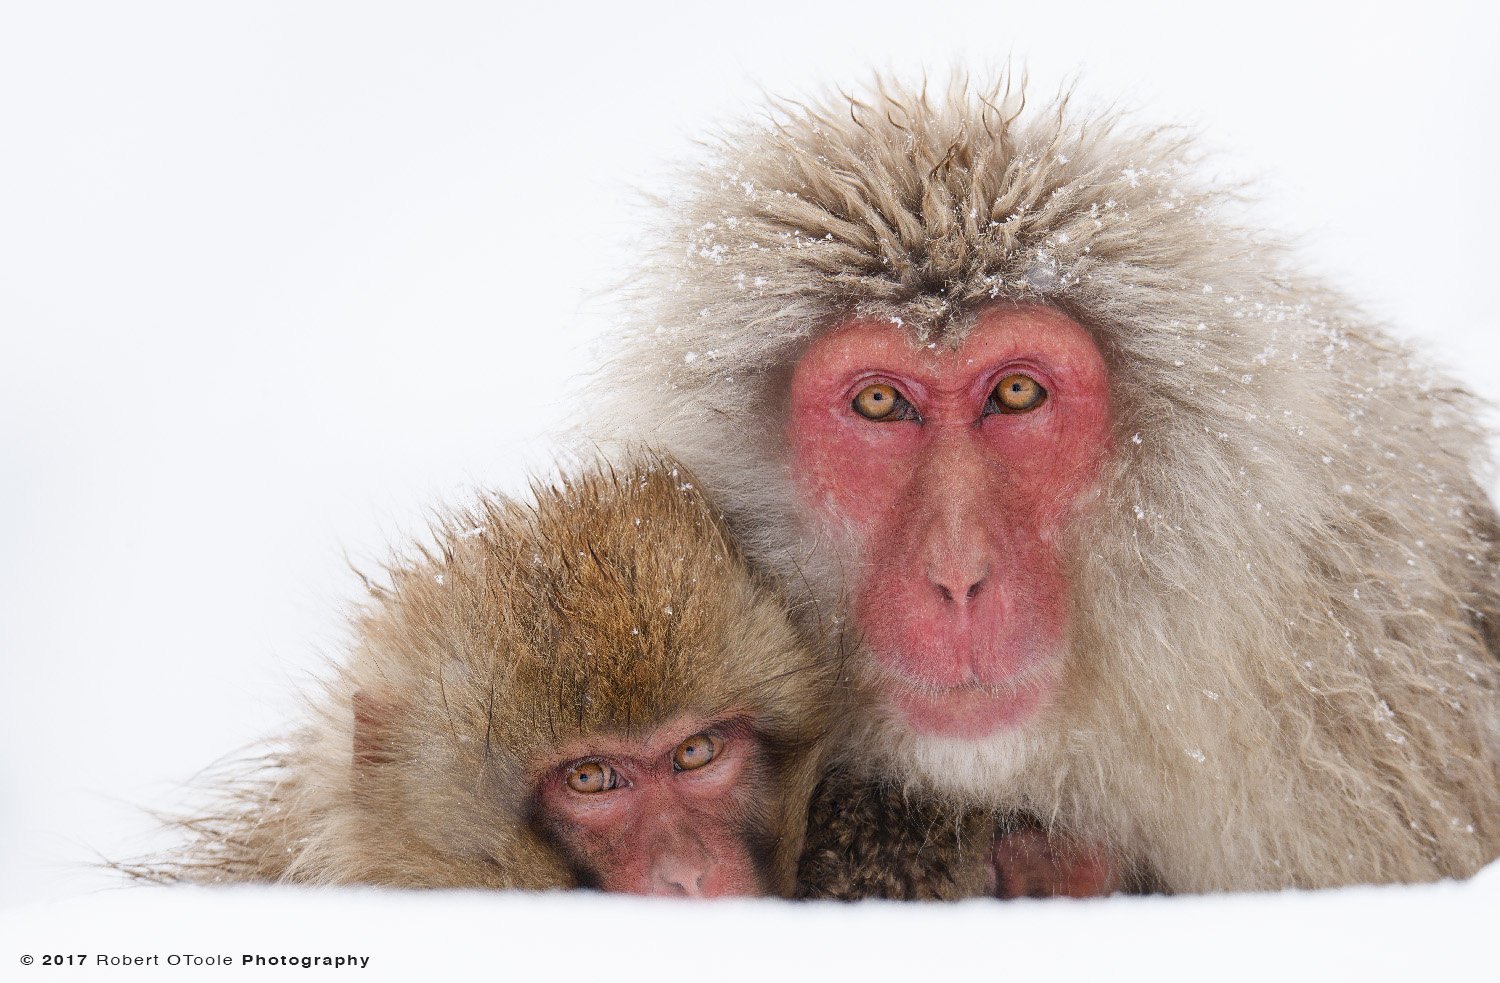 Mature Snow Monkey with Younger Monkeys Looking up in the snow 